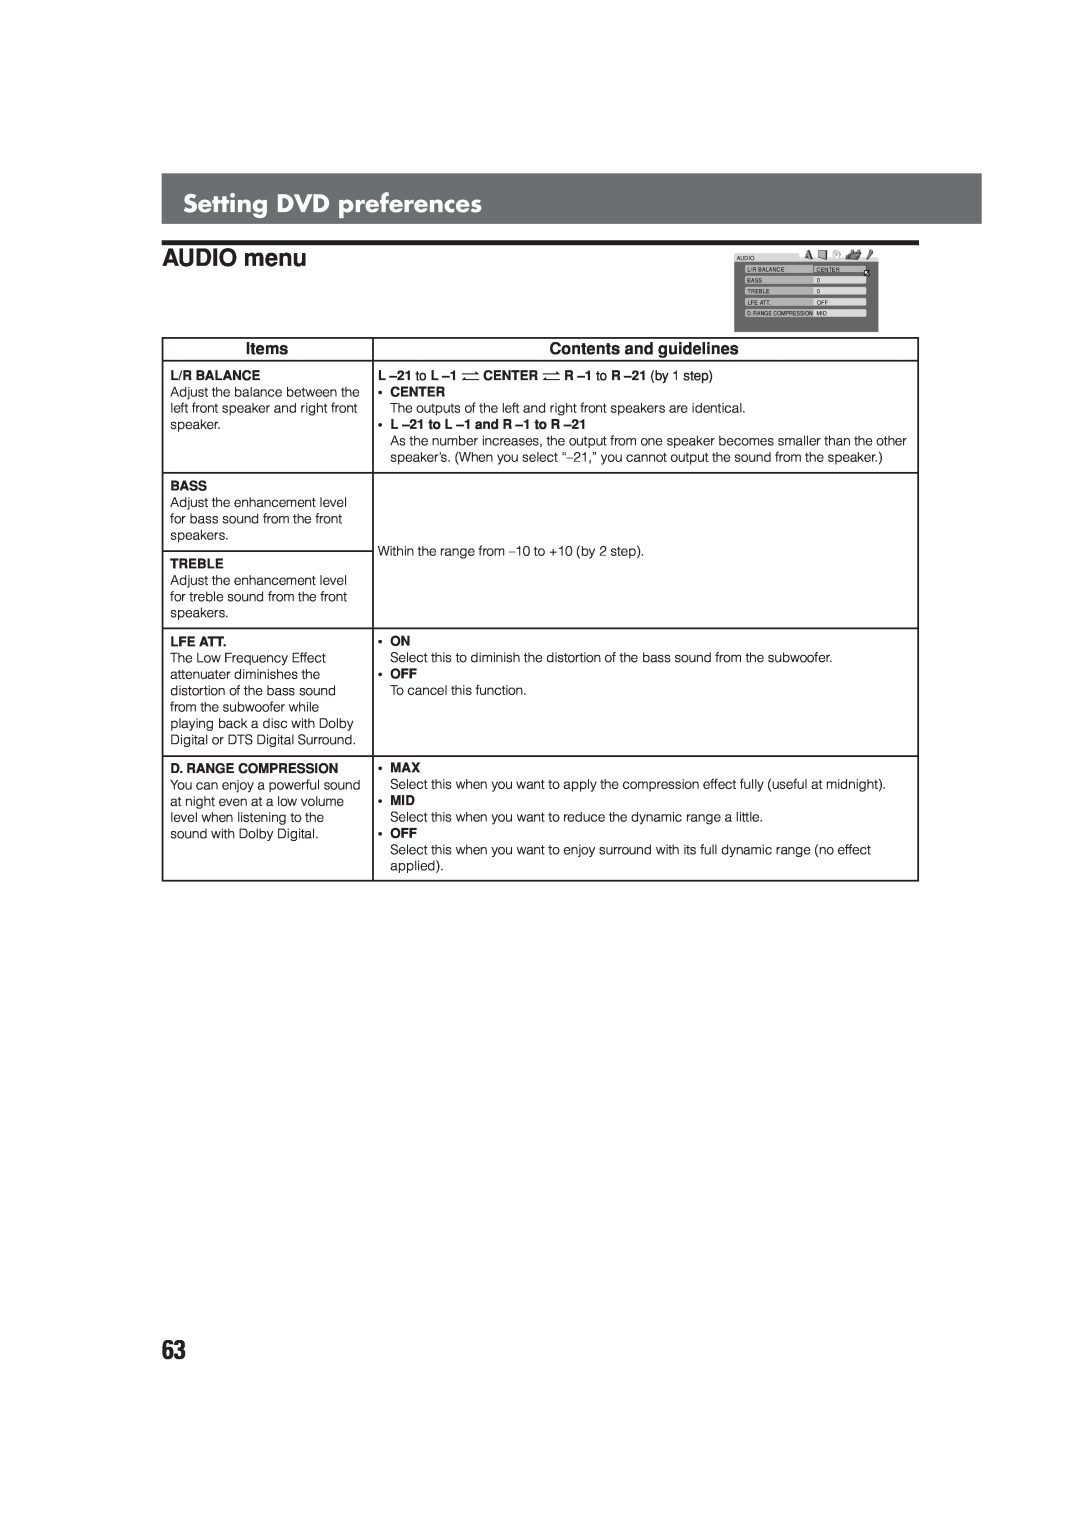 JVC SP-XCV70, XV-THV70R, LVT0865-004A manual AUDIO menu, Setting DVD preferences, Items, Contents and guidelines 